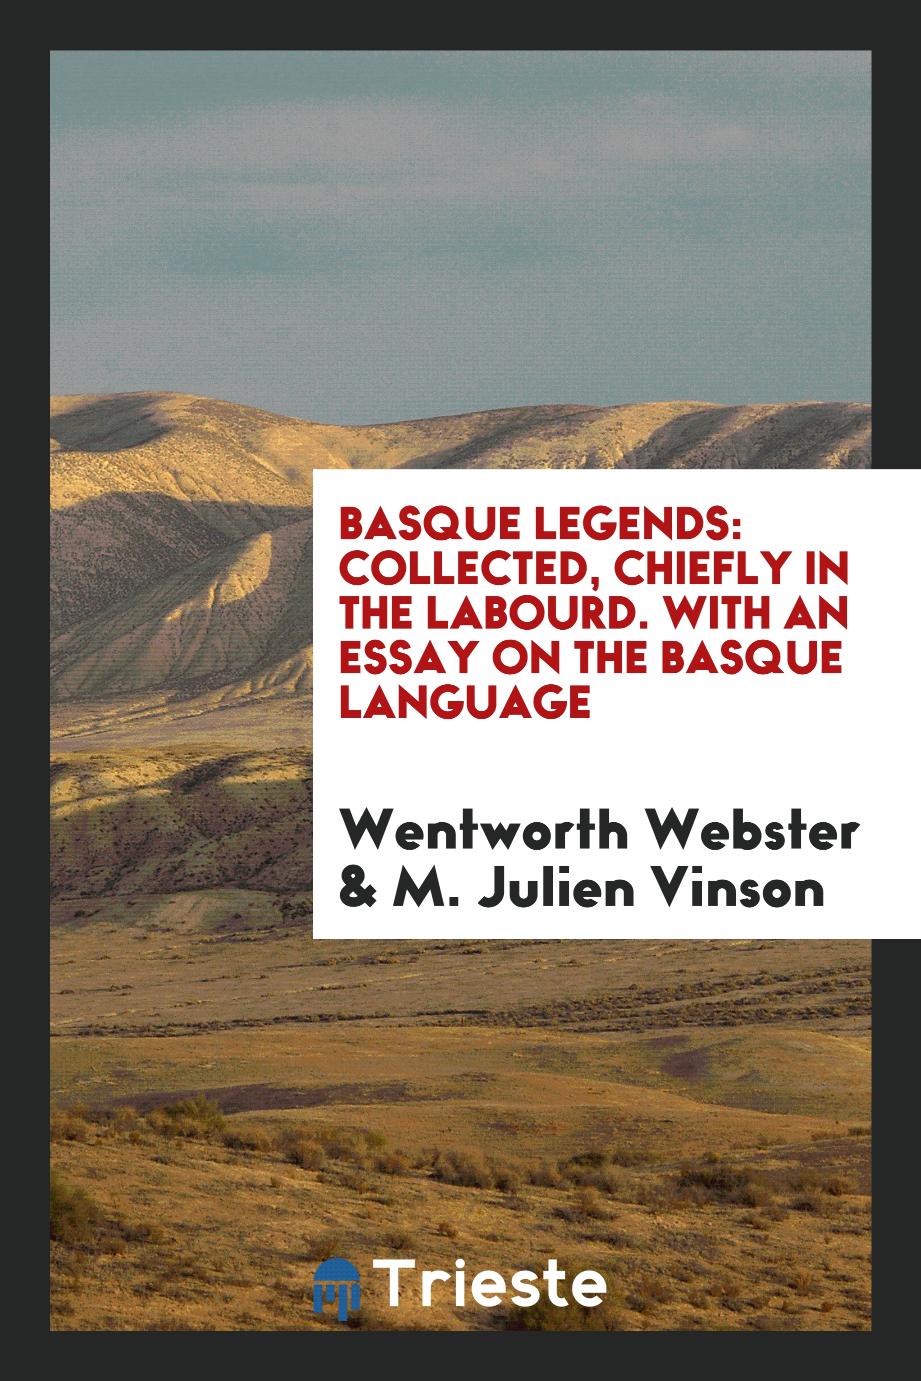 Basque Legends: Collected, Chiefly in the Labourd. With an Essay on the Basque Language